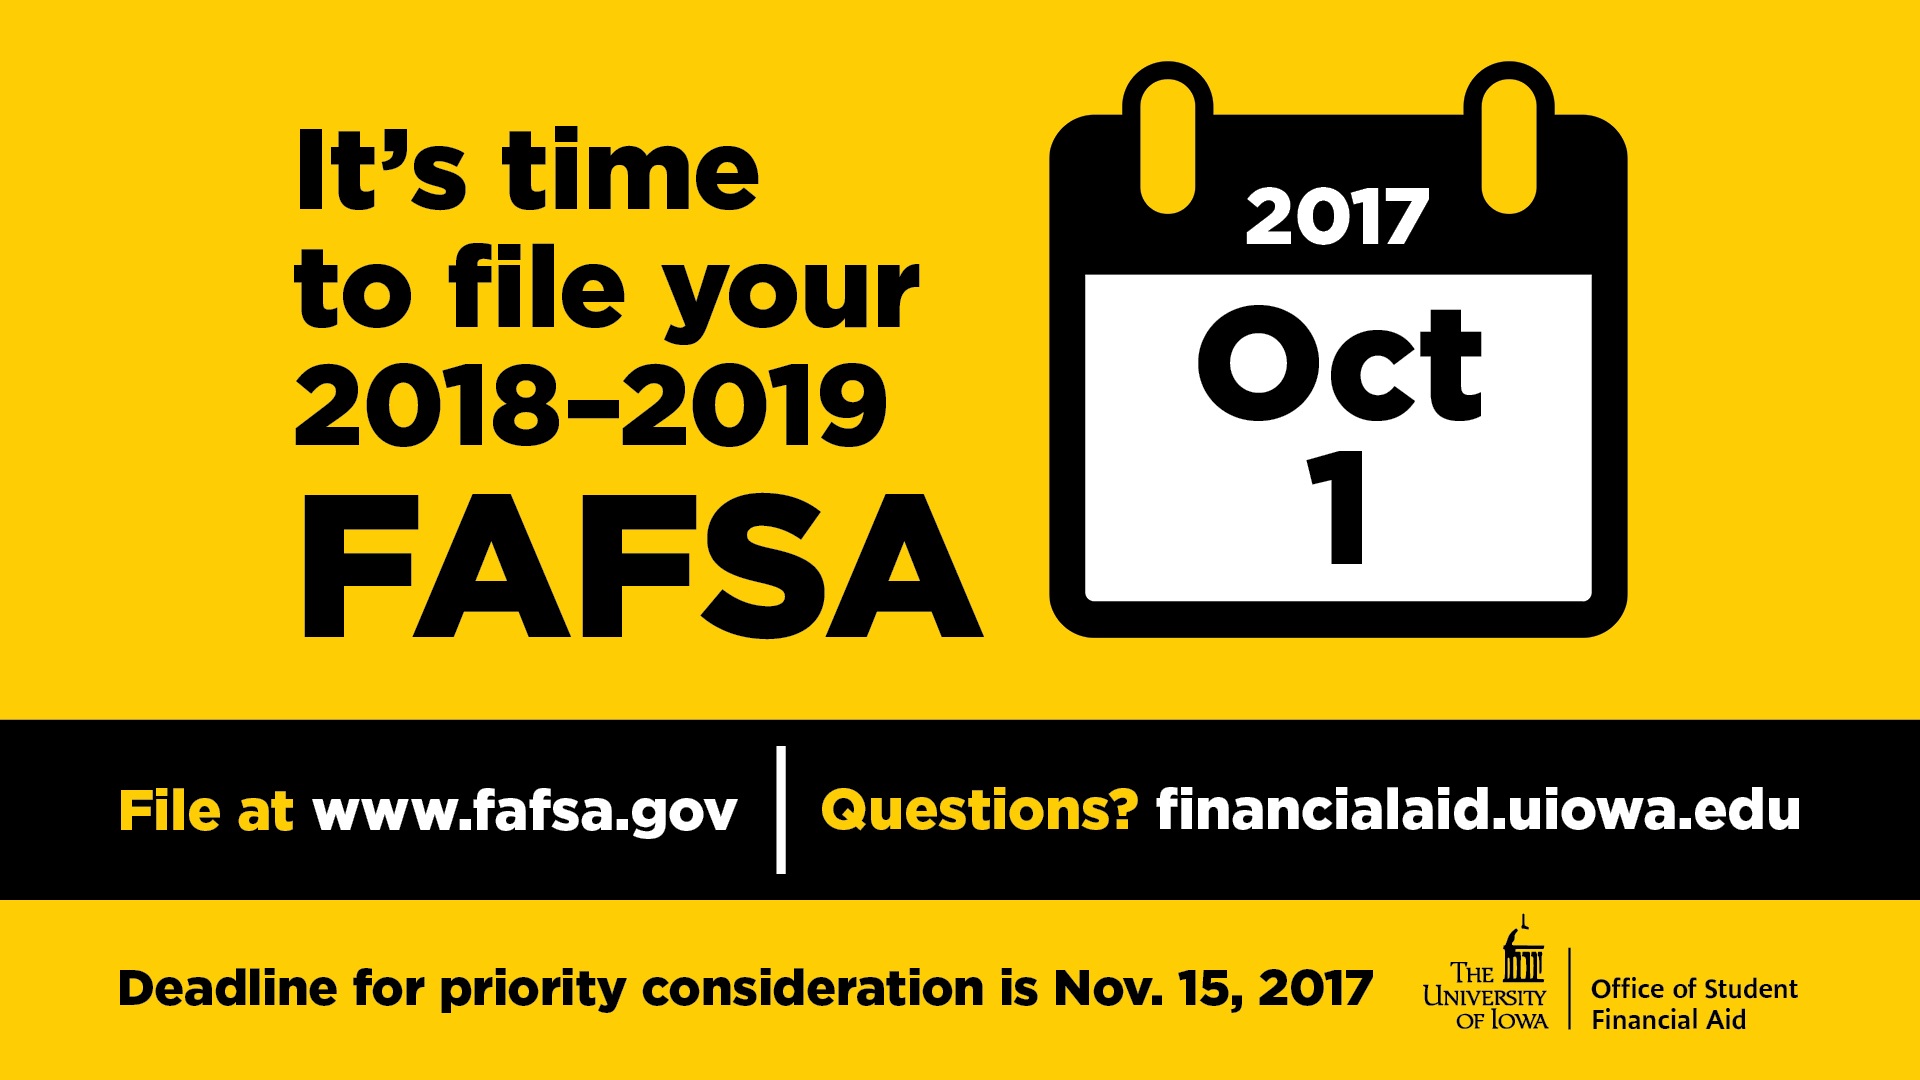 It's Time to File Your 2018-2019 FAFSA